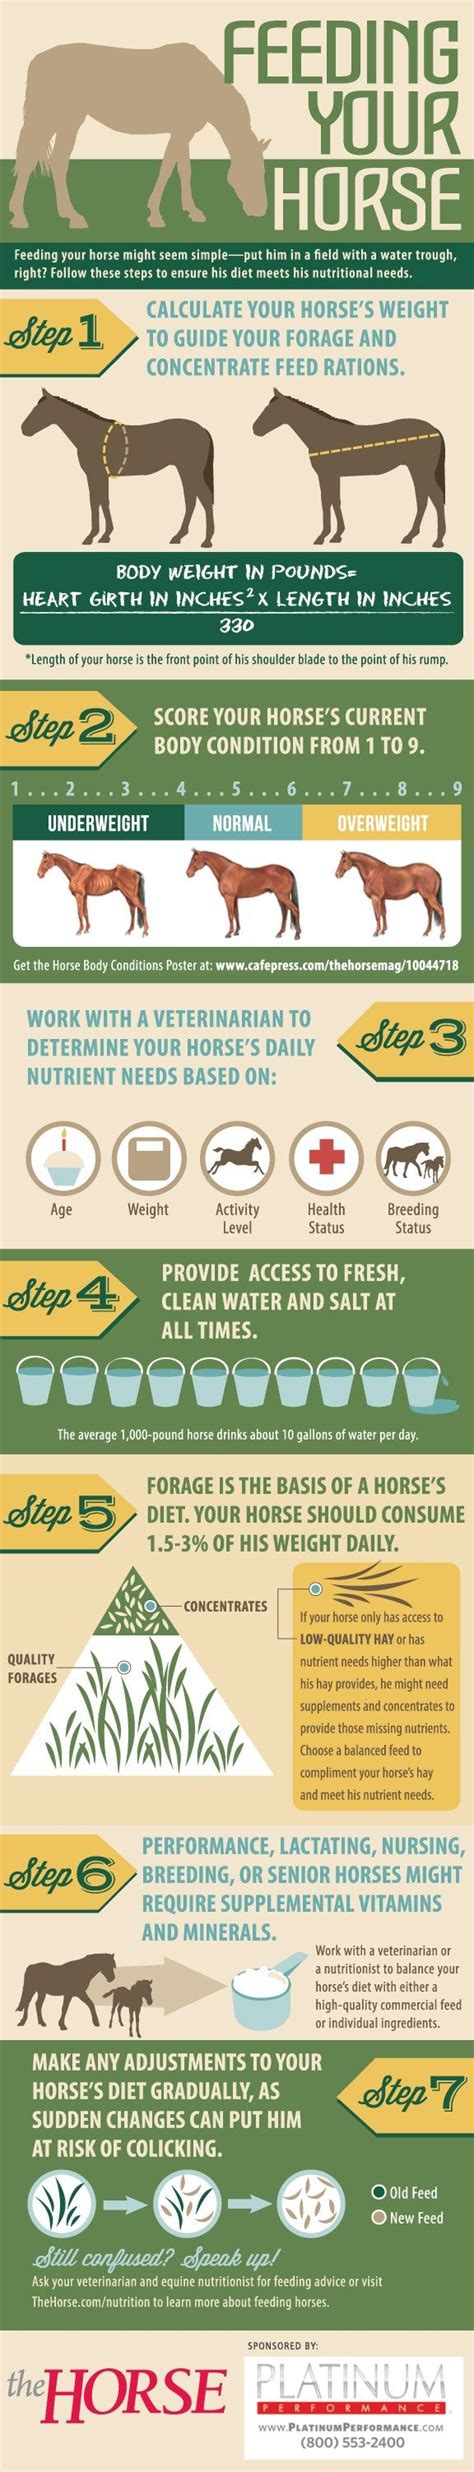 Infographic Feeding Your Horse Equine Nutrition Horse Care Horse